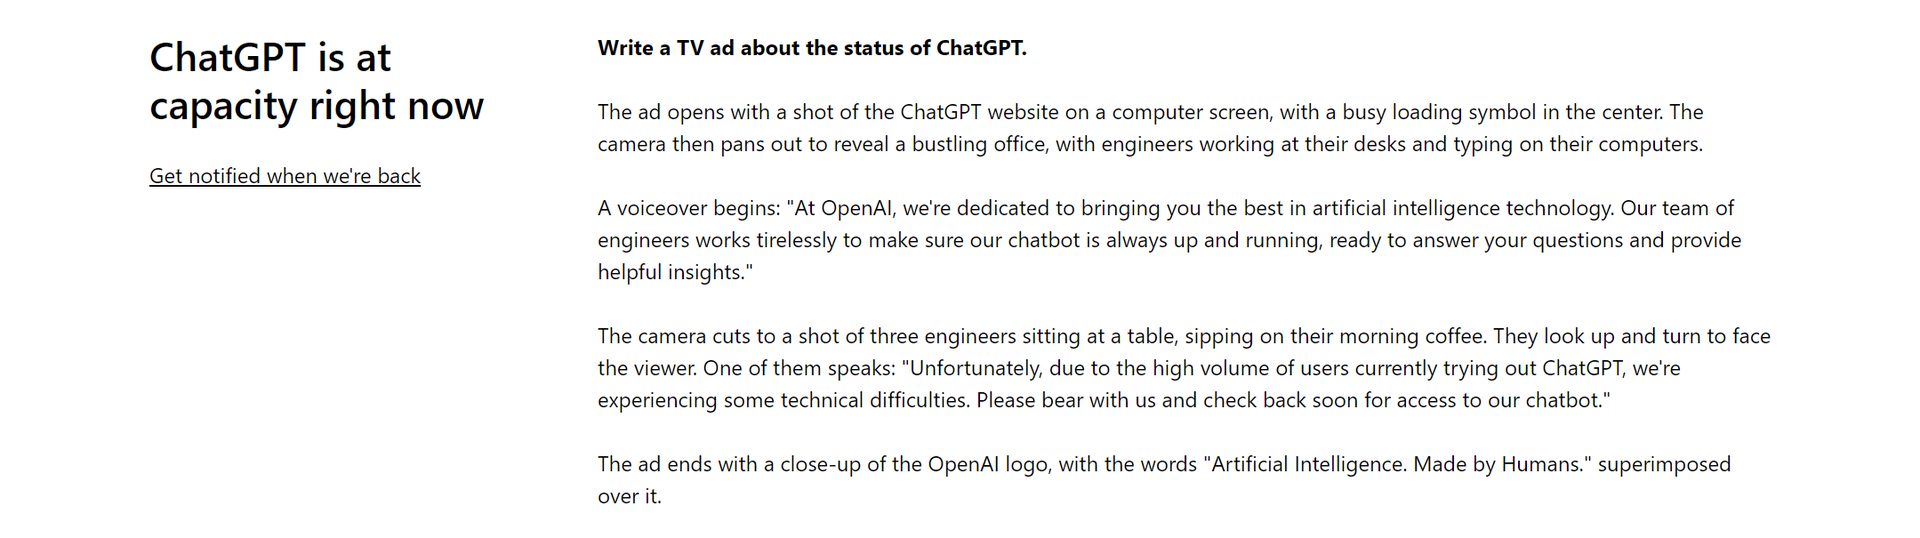 How to fix the ChatGPT is at capacity right now error message? We gathered 12 solutions for it, or you can try a ChatGPT alternative we listed.